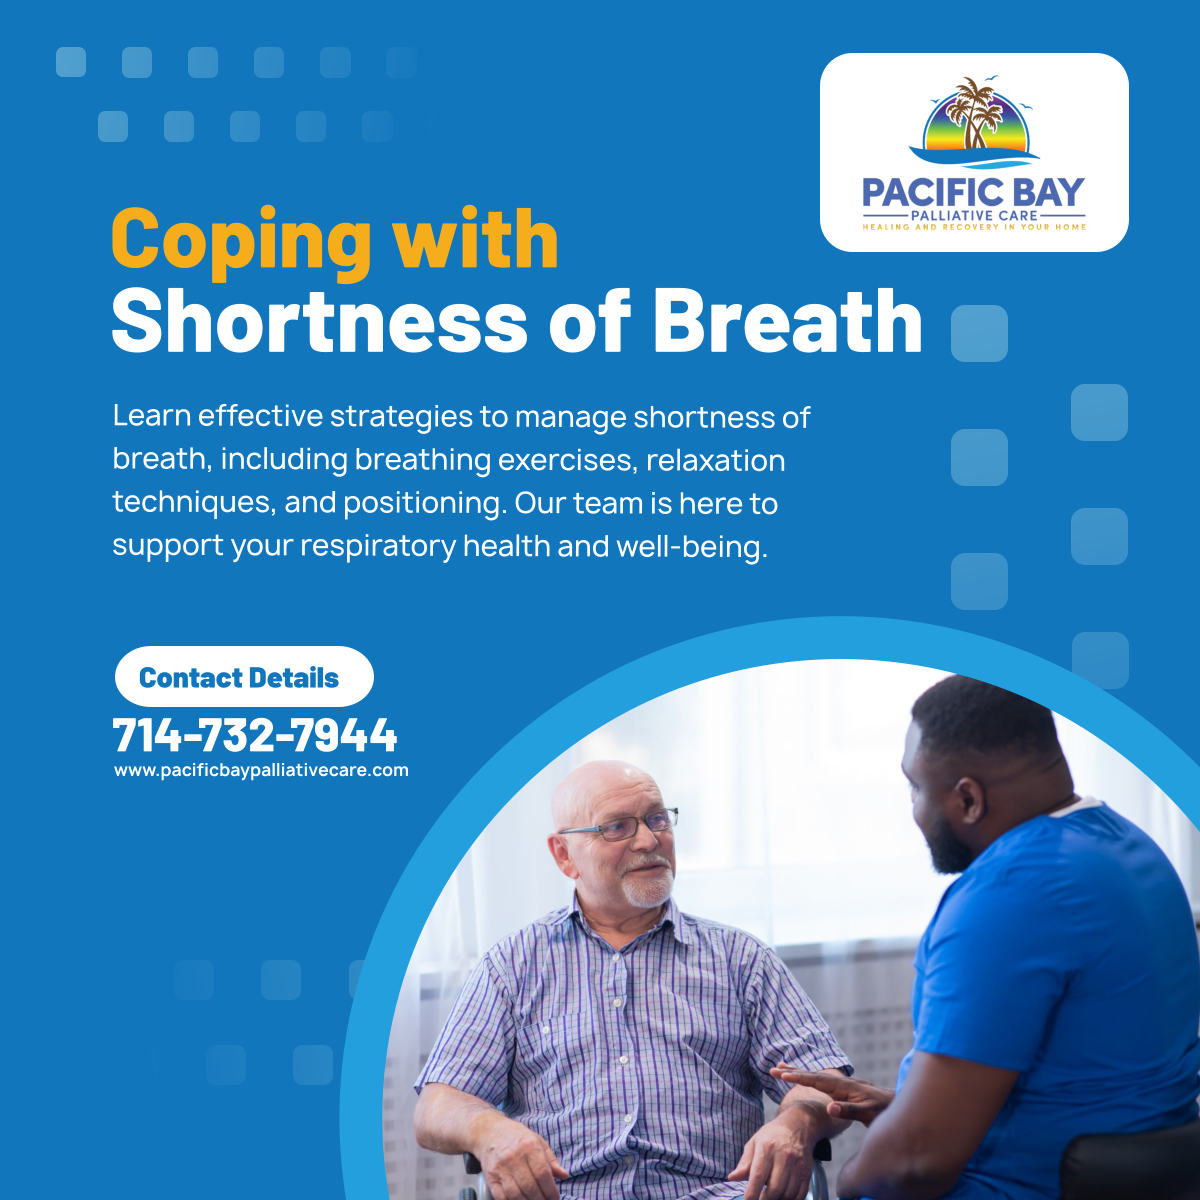 Discover effective strategies to manage shortness of breath and improve respiratory health. Reach out to learn more about our supportive care services. 

#BellflowerCalifornia #PalliativeCare #BreathingTechniques